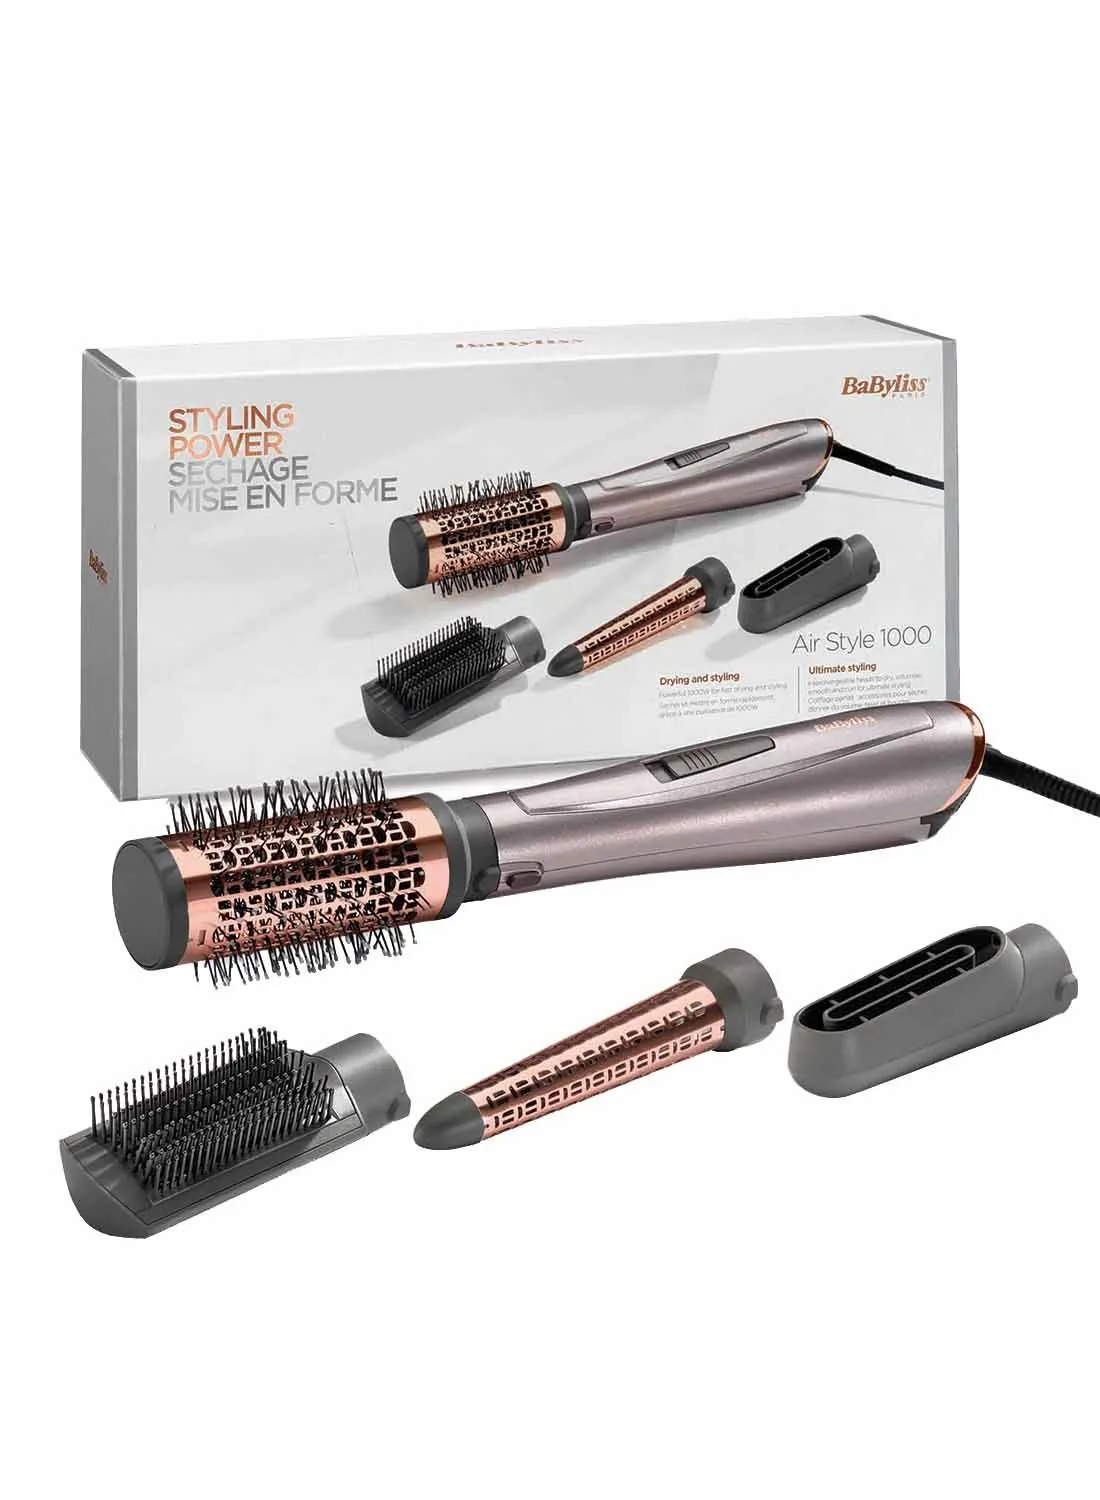 babyliss 1000 Air Styler | Adjustable 2 Heats + Cool Setting | Ionic Technology For Frizz Free Hair | FREE Conical Curling, Volumizing & Precise Drying Attachment With Heat Pouch | AS136SDE (Grey) Purple